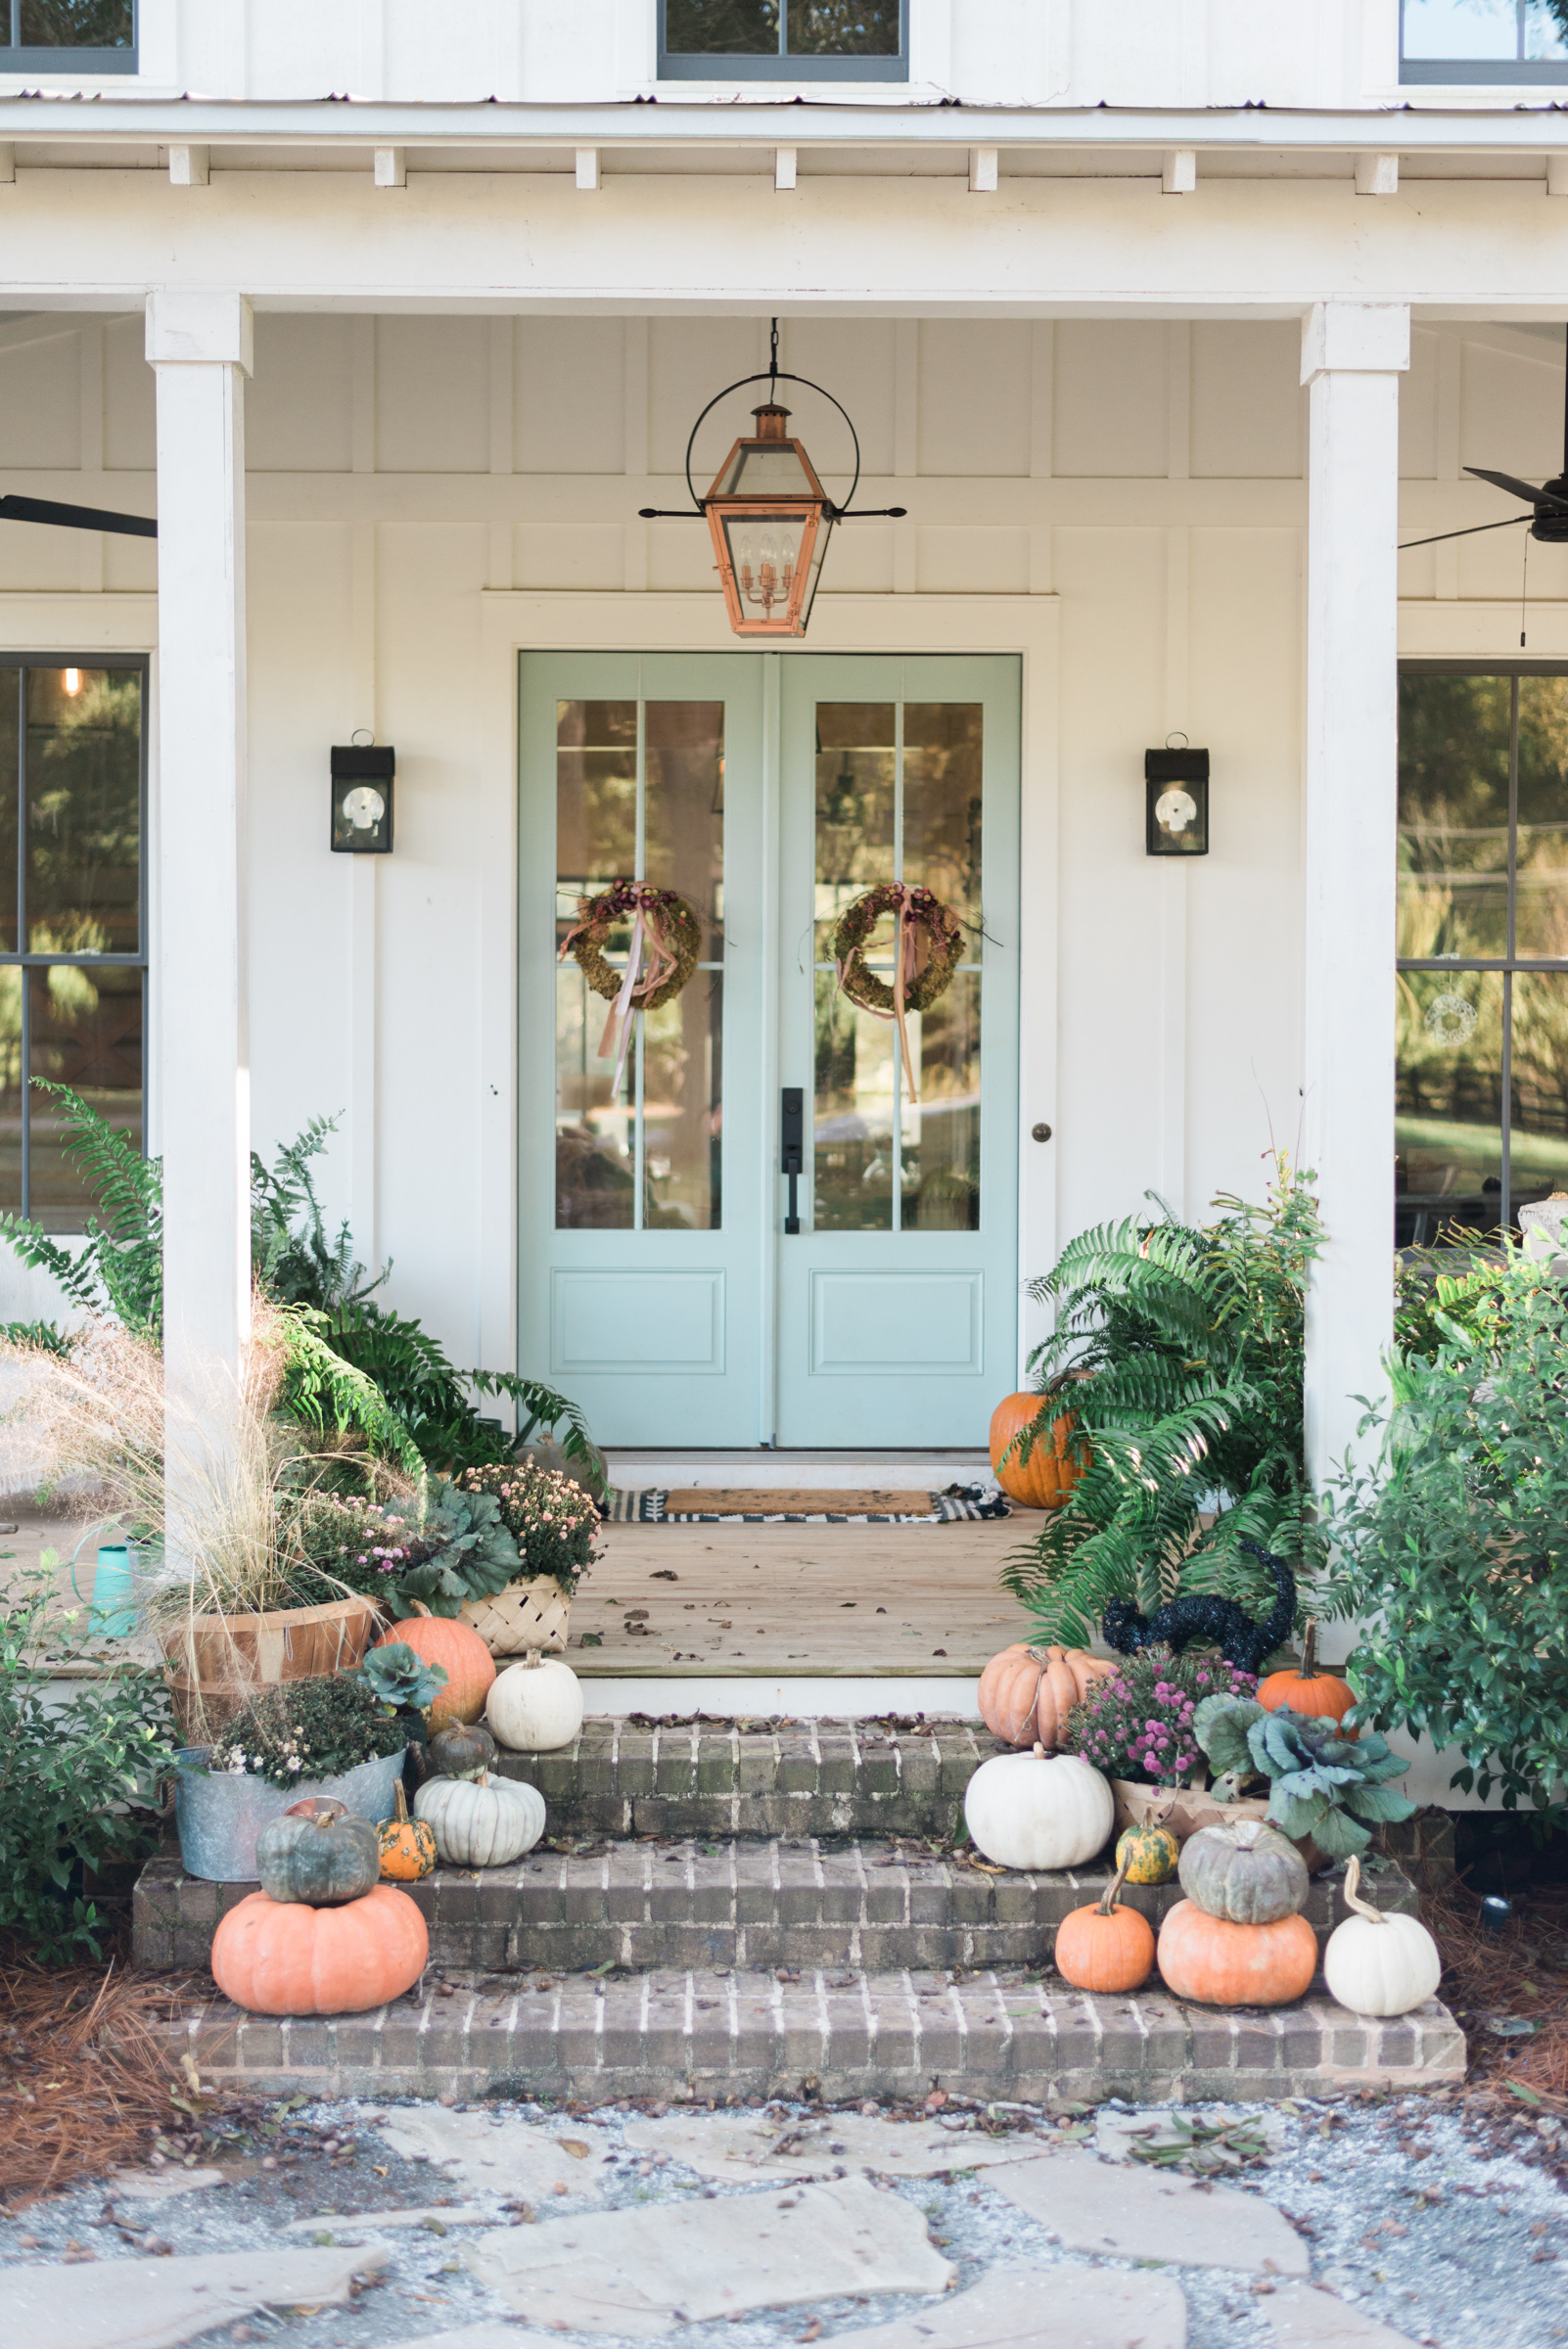 My Front Porch Views this Autumn | aleamoore.com